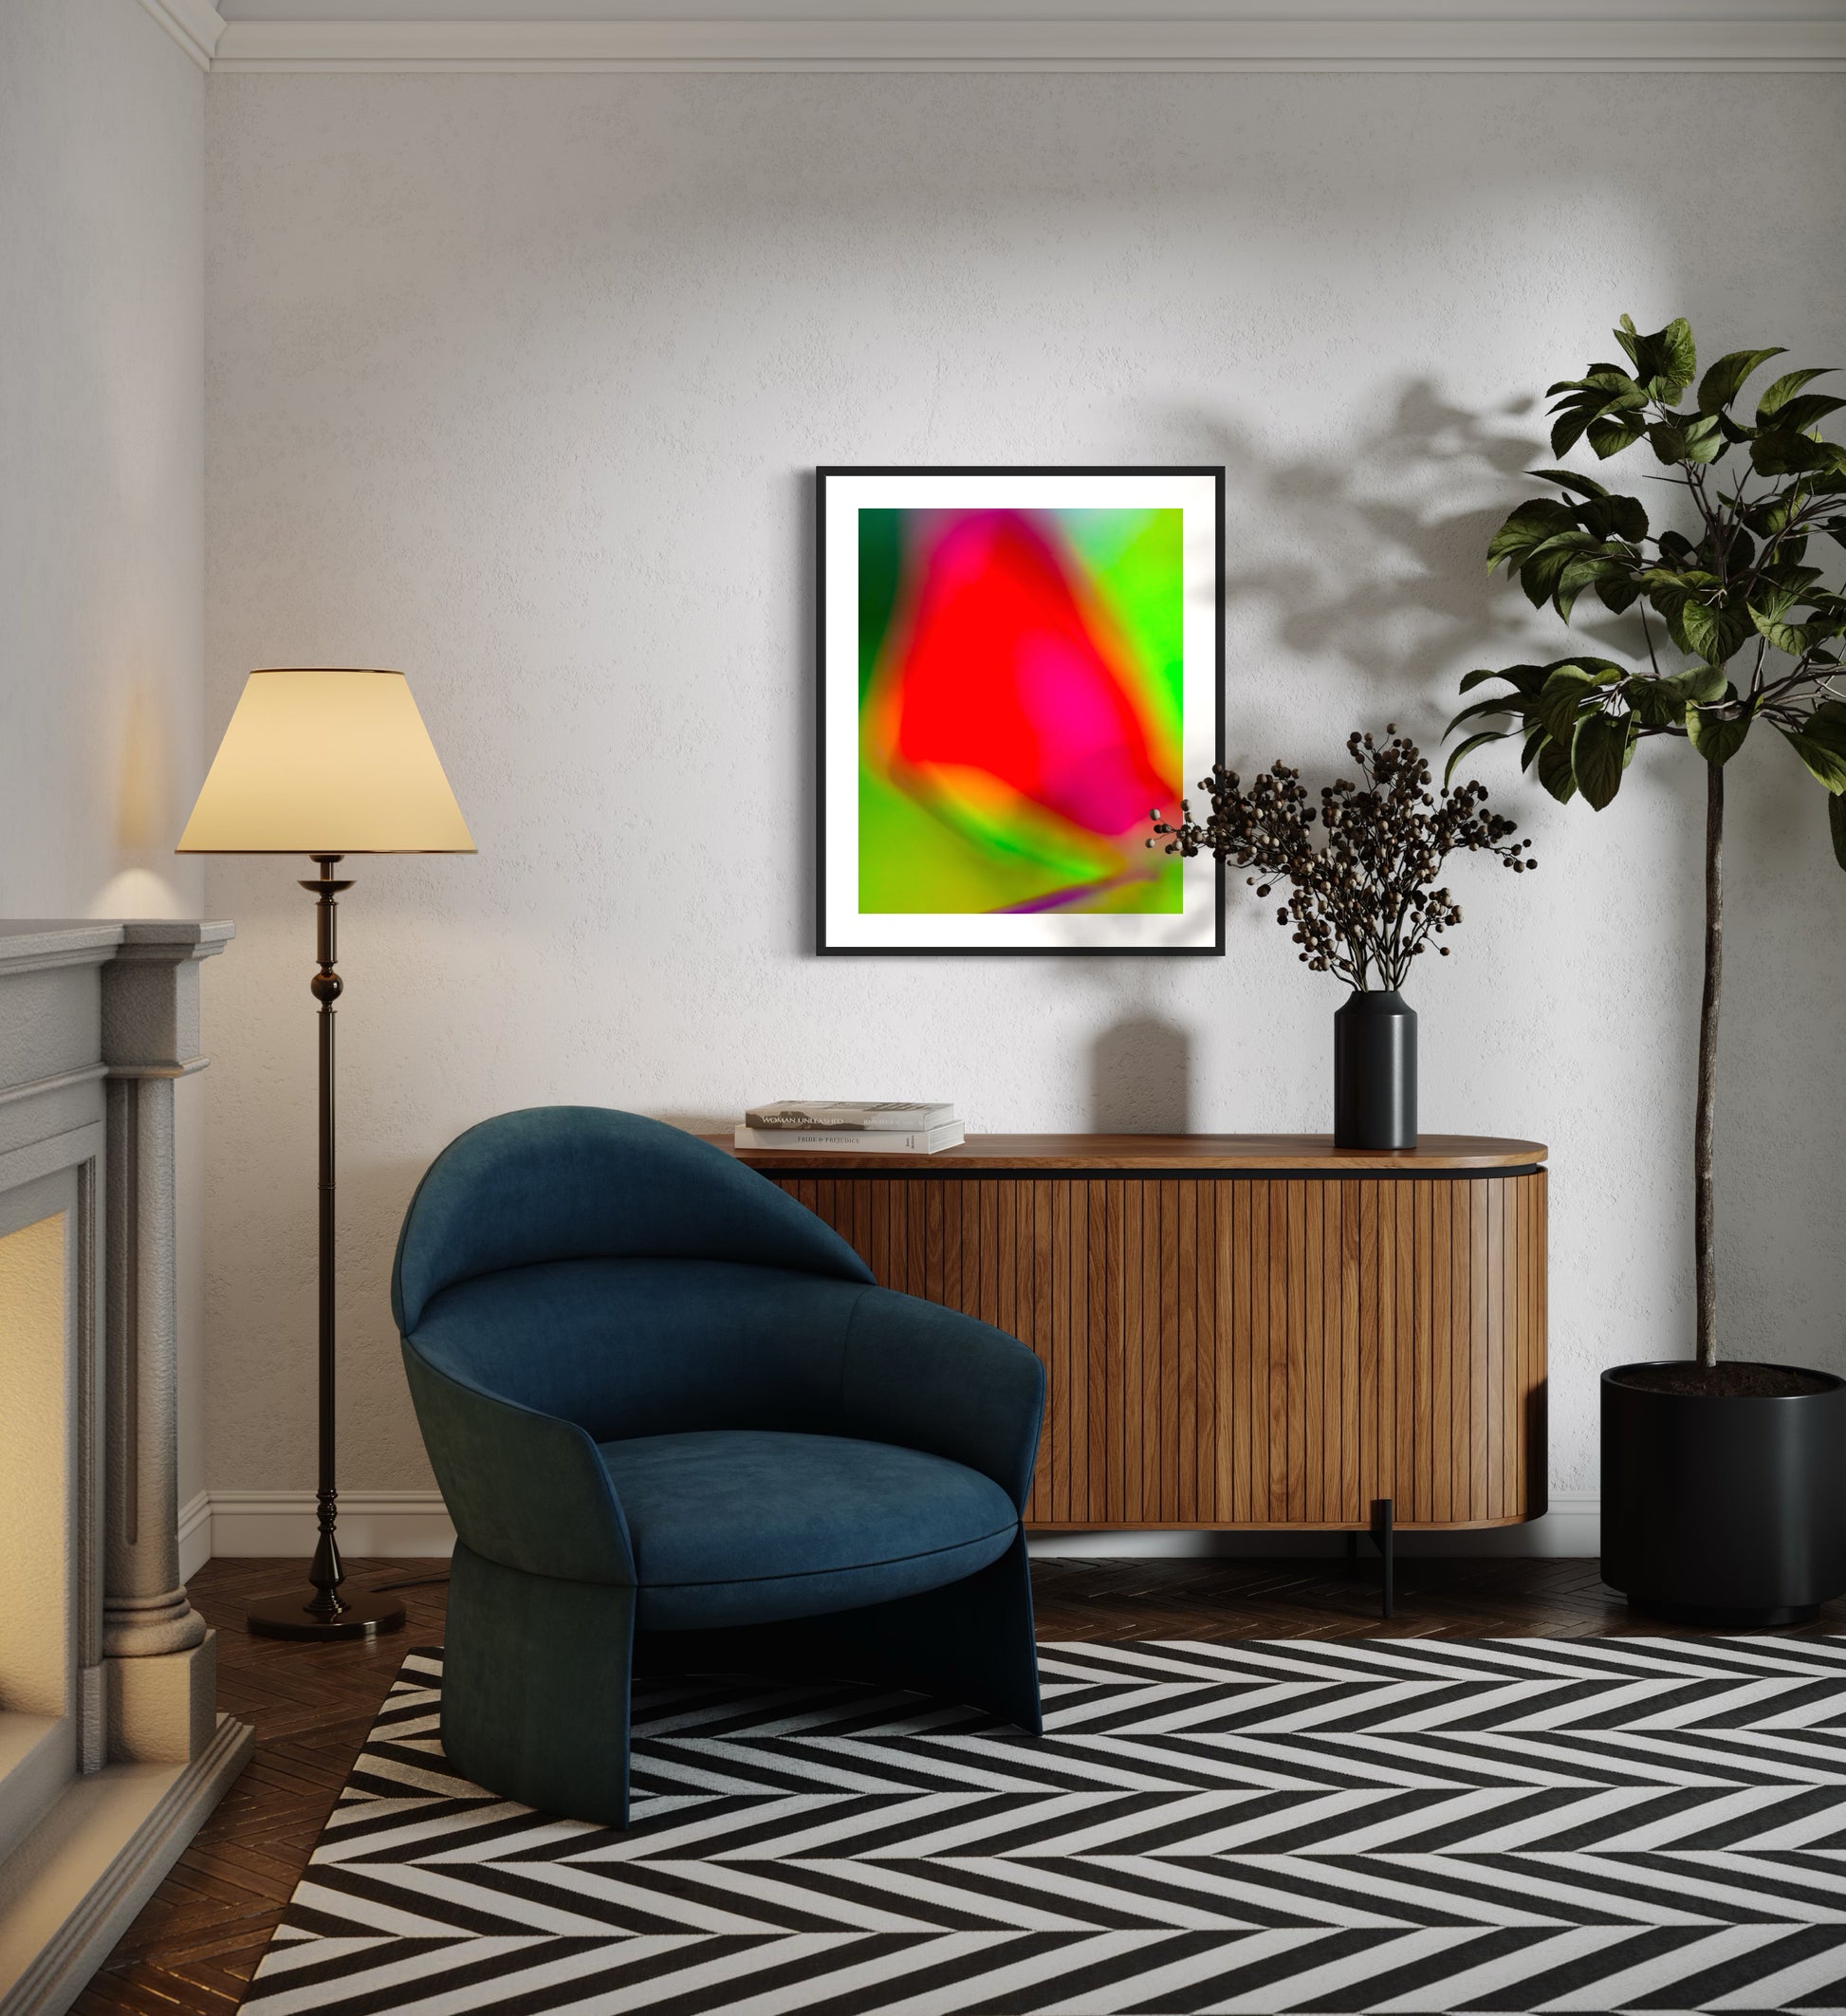 photo of blurry red leaf on blurred bright green background in black frame on white wall in living room